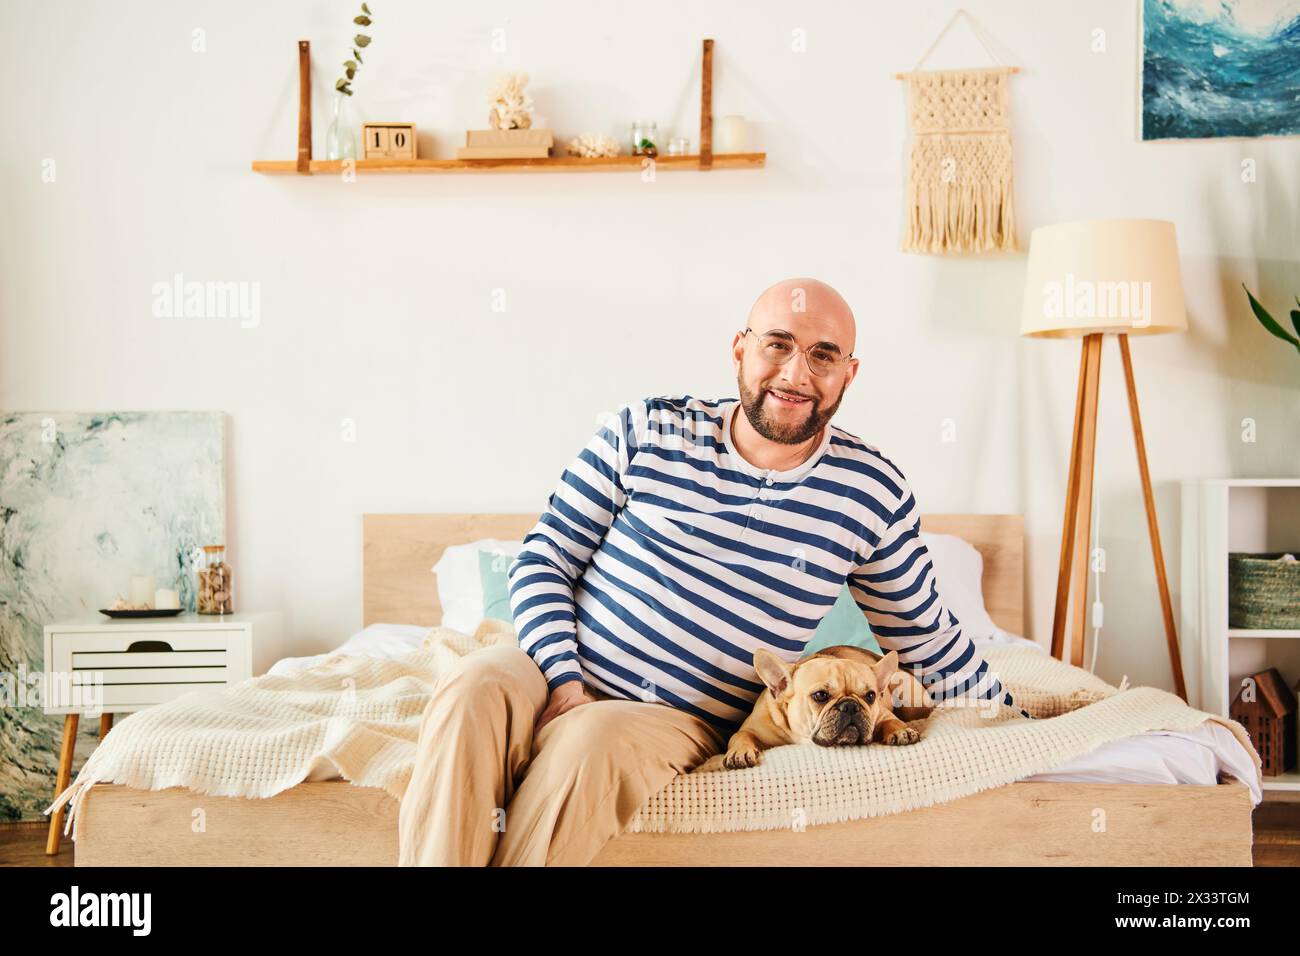 A man with glasses sits peacefully on a bed, accompanied by his French Bulldog. Stock Photo